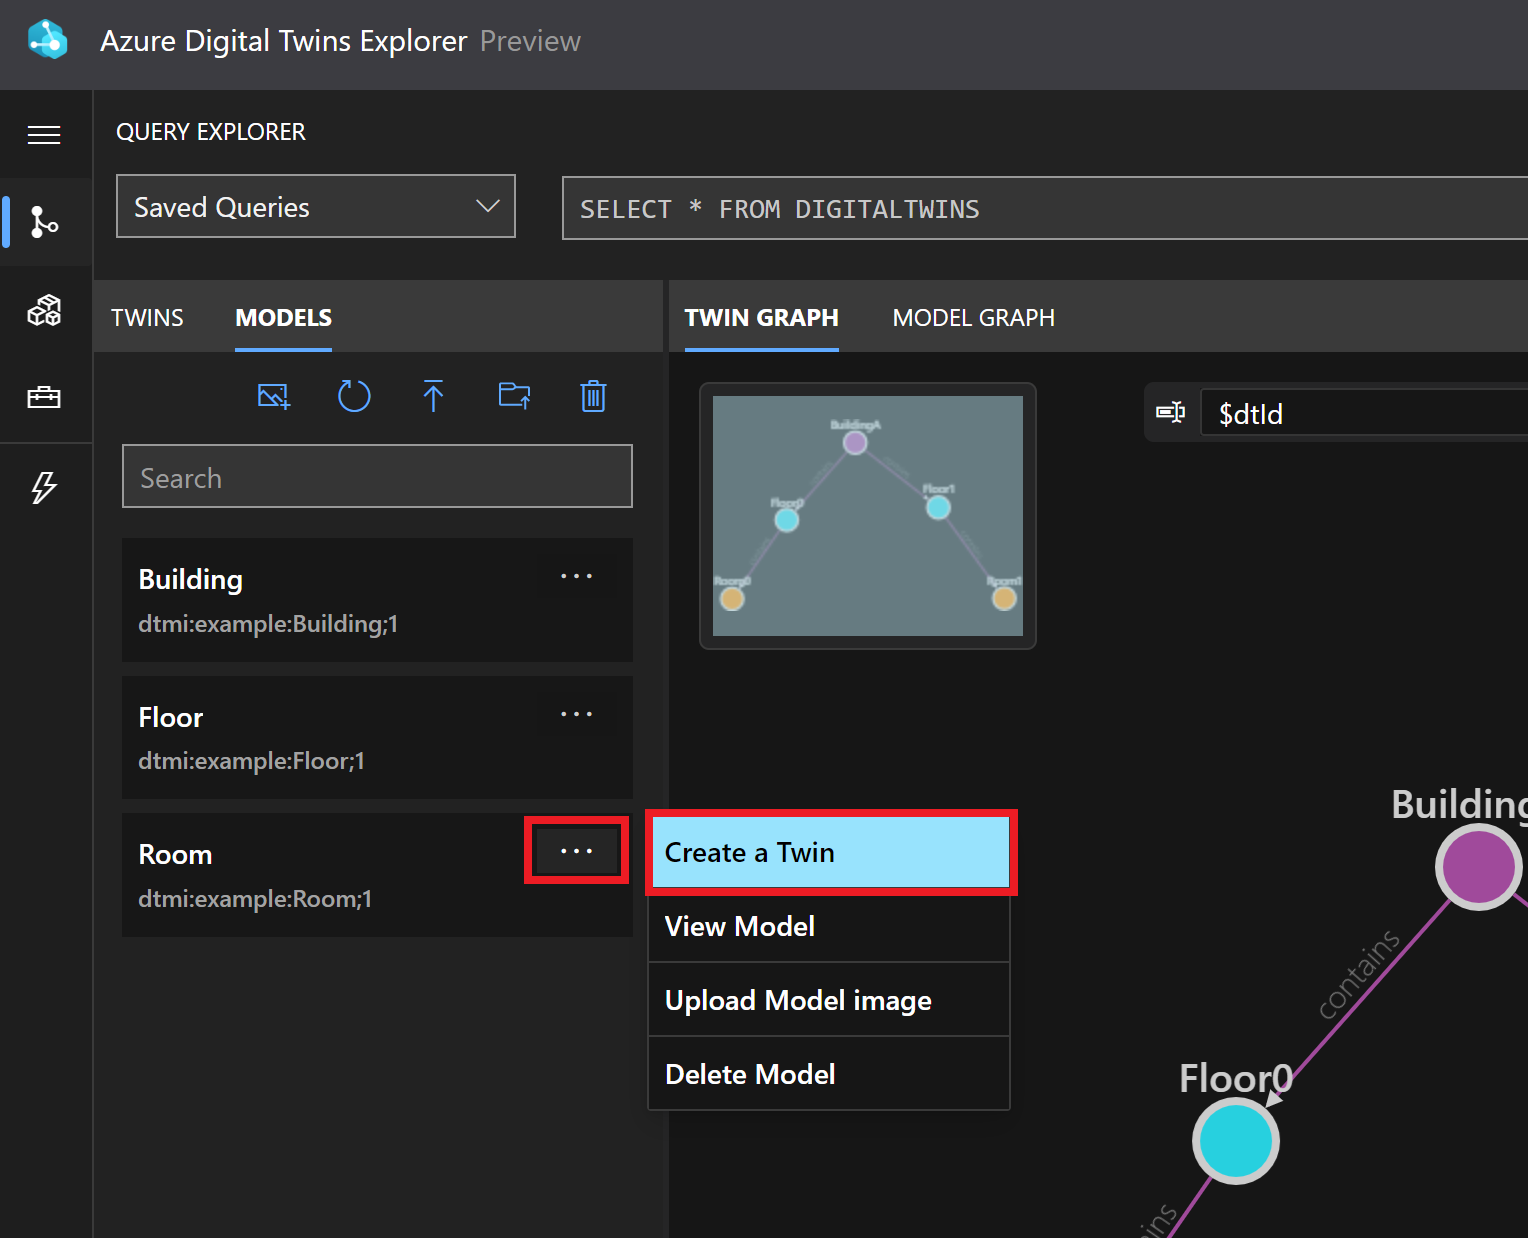 Screenshot of the Azure Digital Twins Explorer showing the Models panel, and the option to Create a Twin from the Room model.